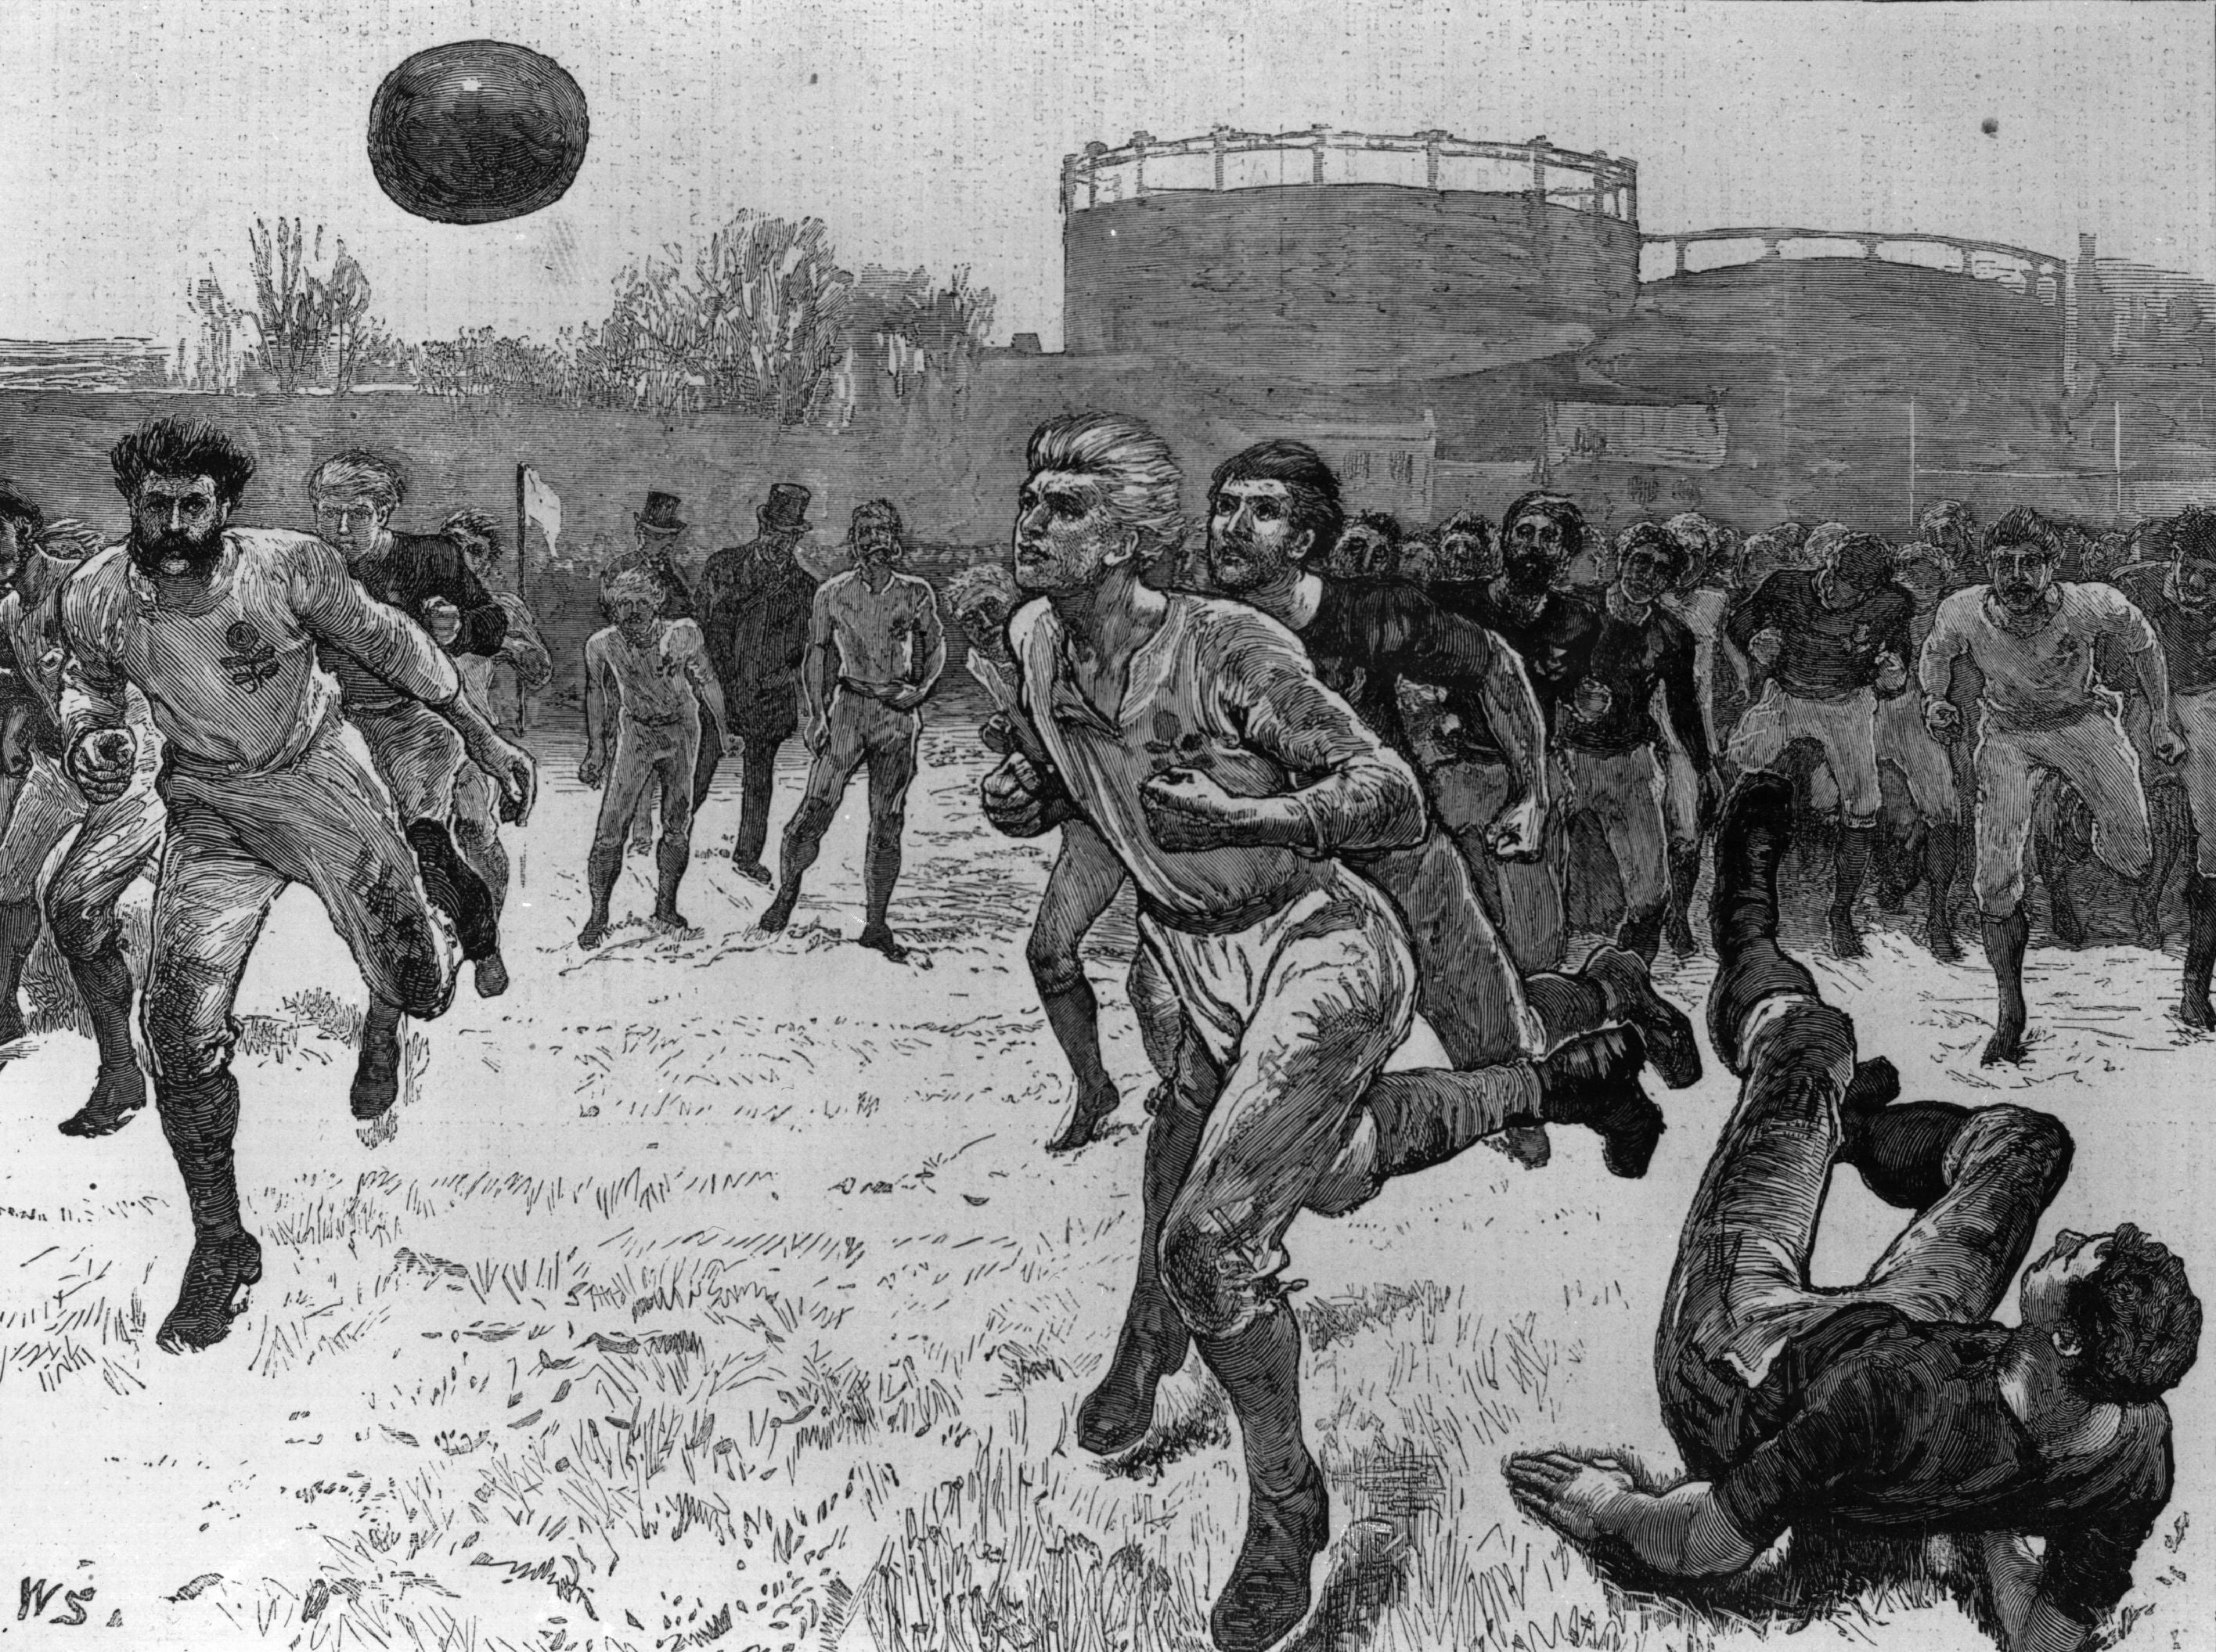 A football match in 1872: an amateur ethos underpinned by ‘Muscular Christianity’